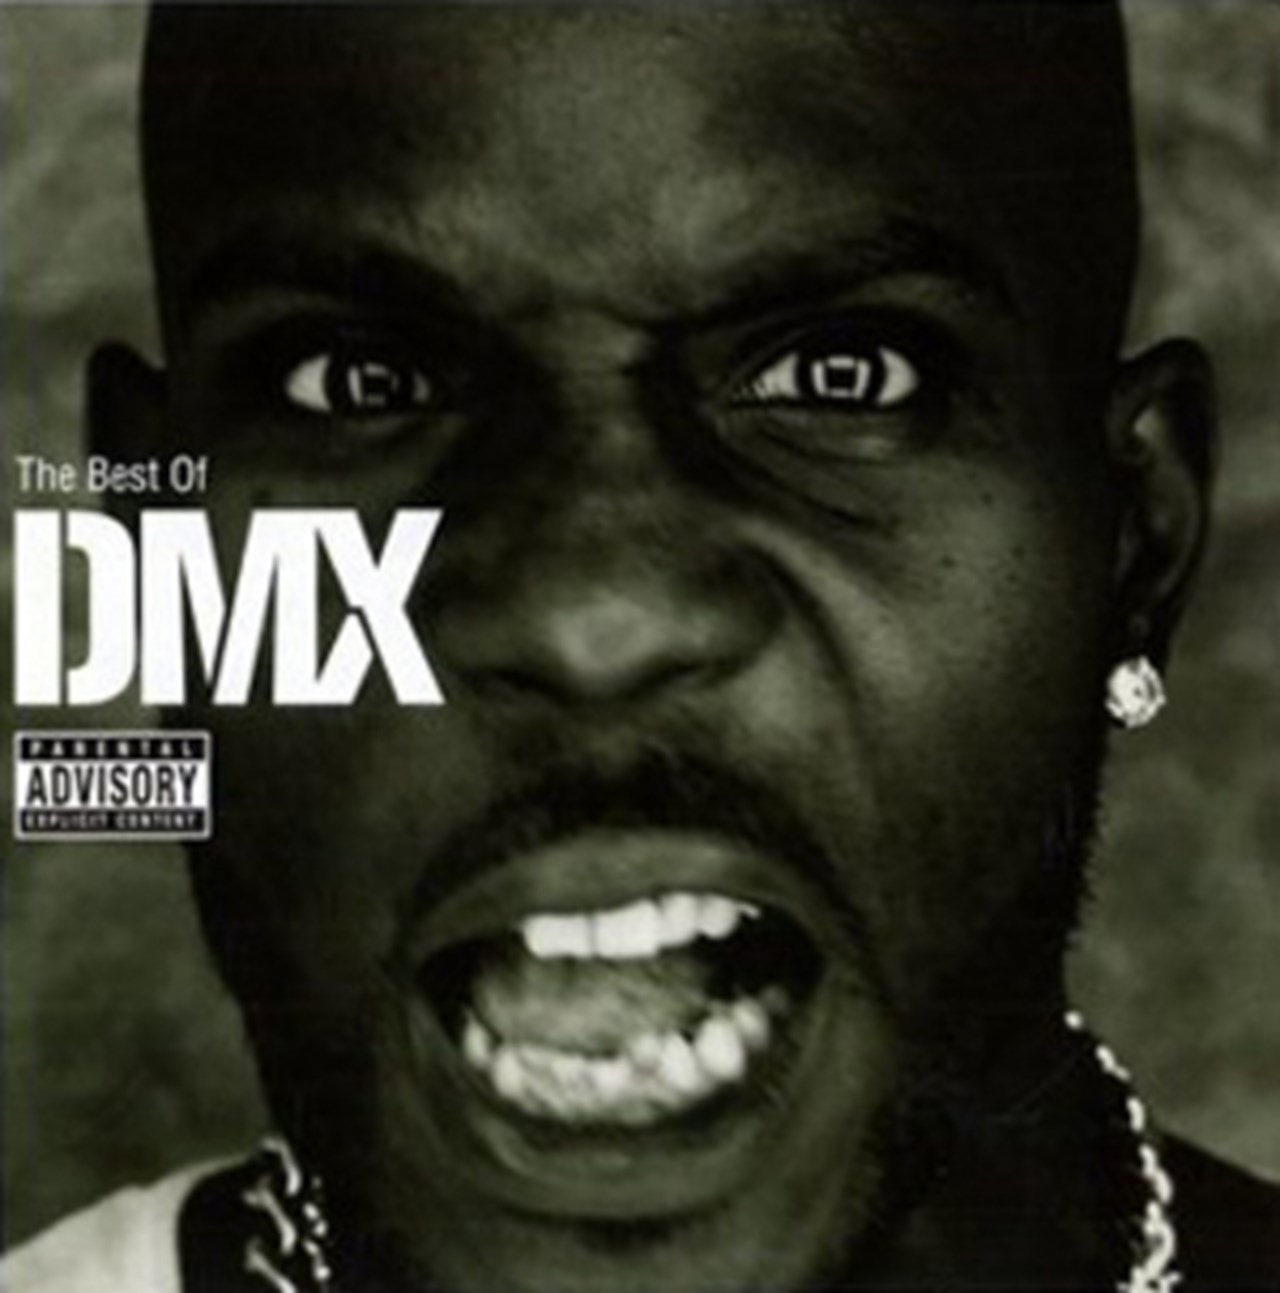 The Best of DMX | CD Album | Free shipping over £20 | HMV Store